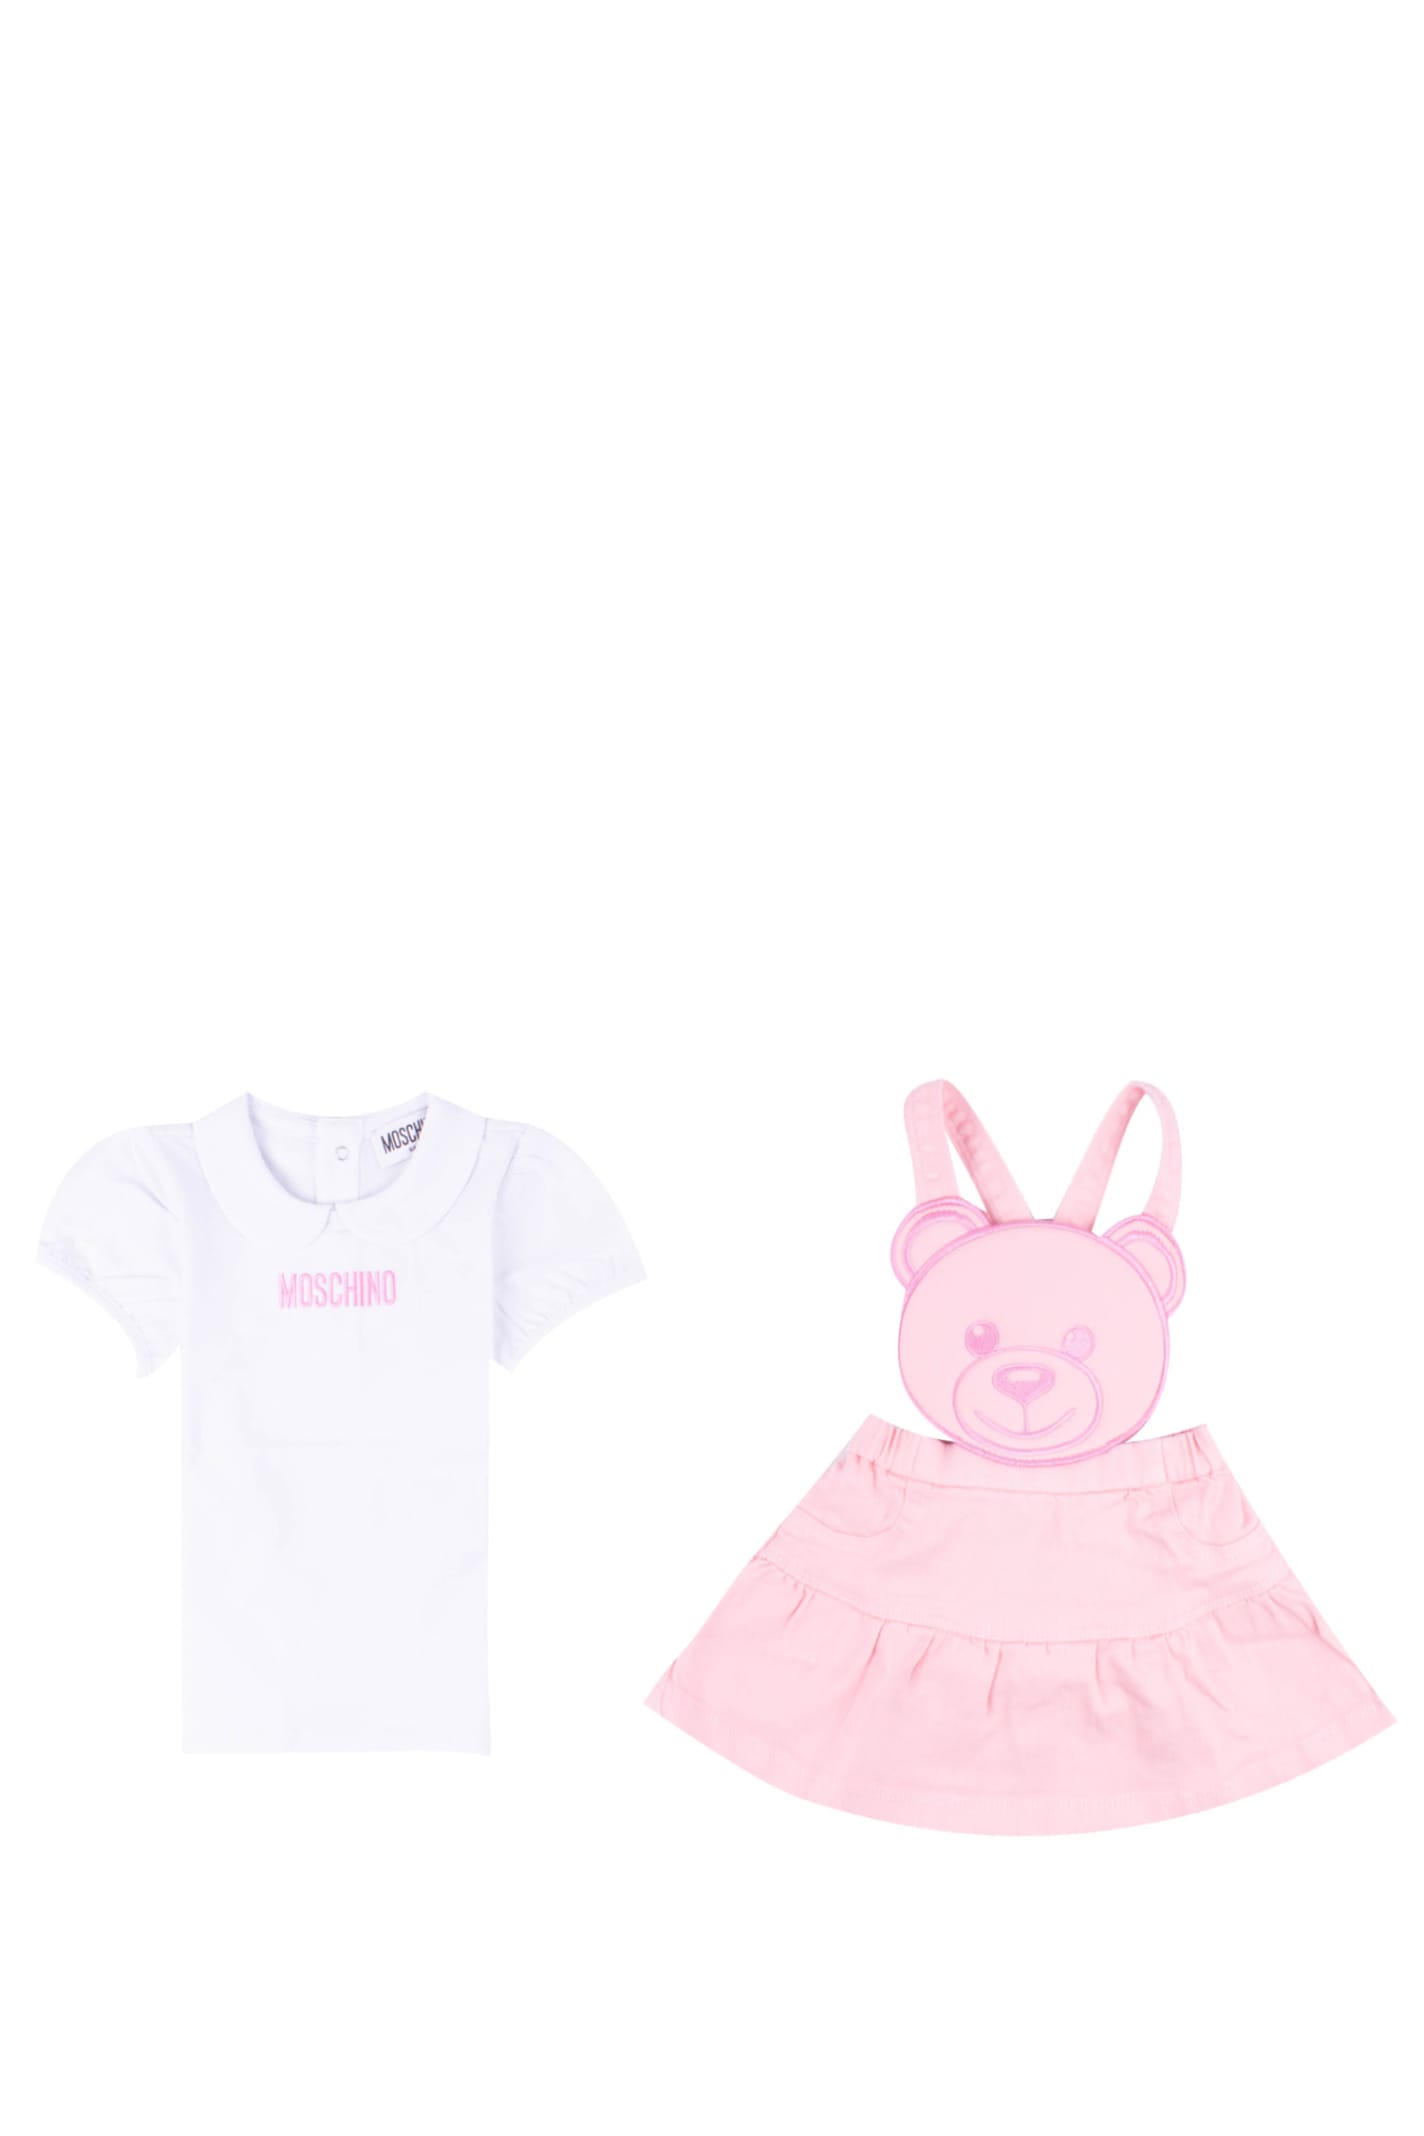 Moschino Babies' Set Of T-shirt And Cotton Dress In Multicolor